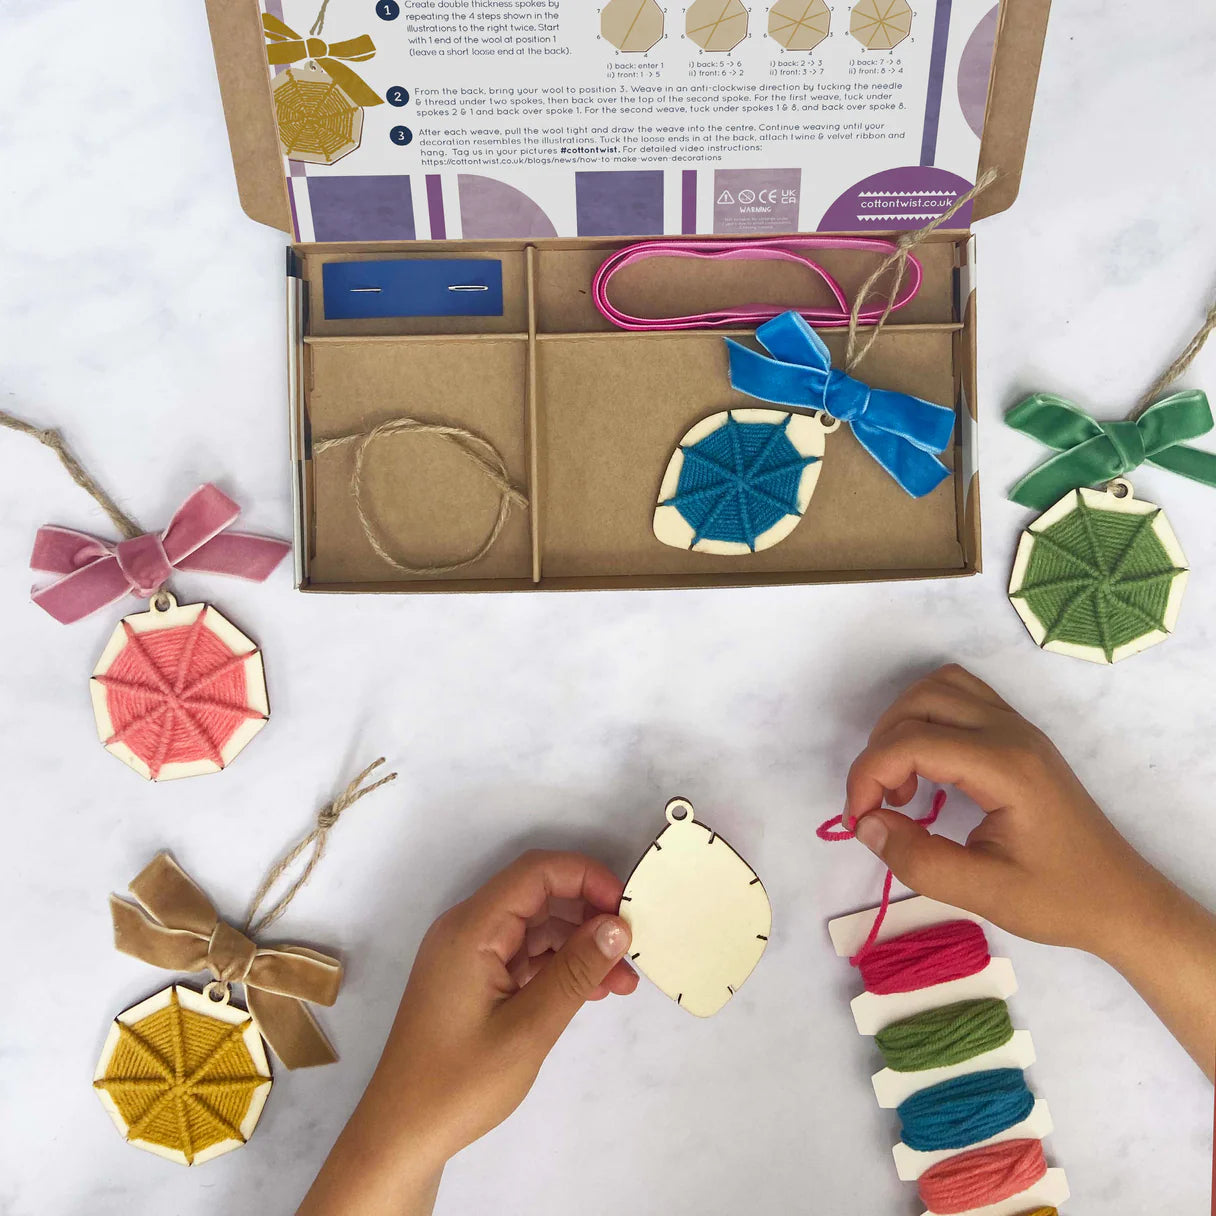 Cotton Twist Wooden Craft Kit - Woven Hanging Decorations - Little Reef and Friends